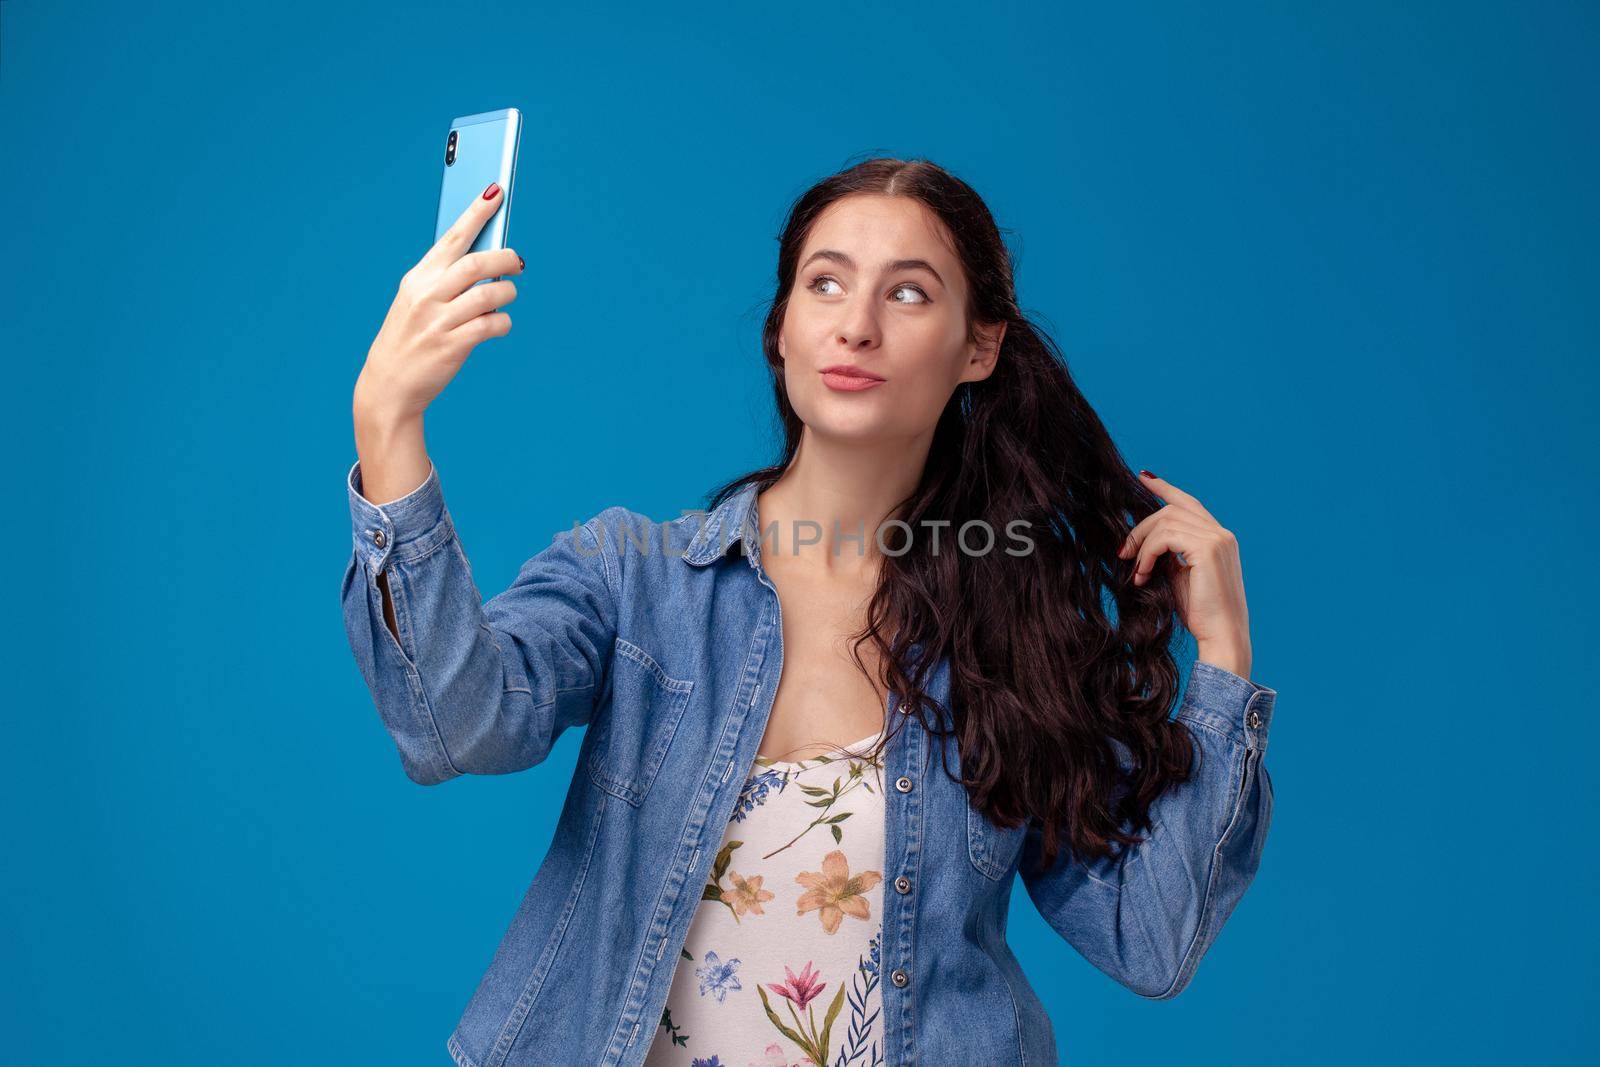 Young pretty female in a white dress with floral print and blue denim shirt is posing with a smartphone on a blue background. She is making a selfie. People sincere emotions, lifestyle concept. Mockup copy space.